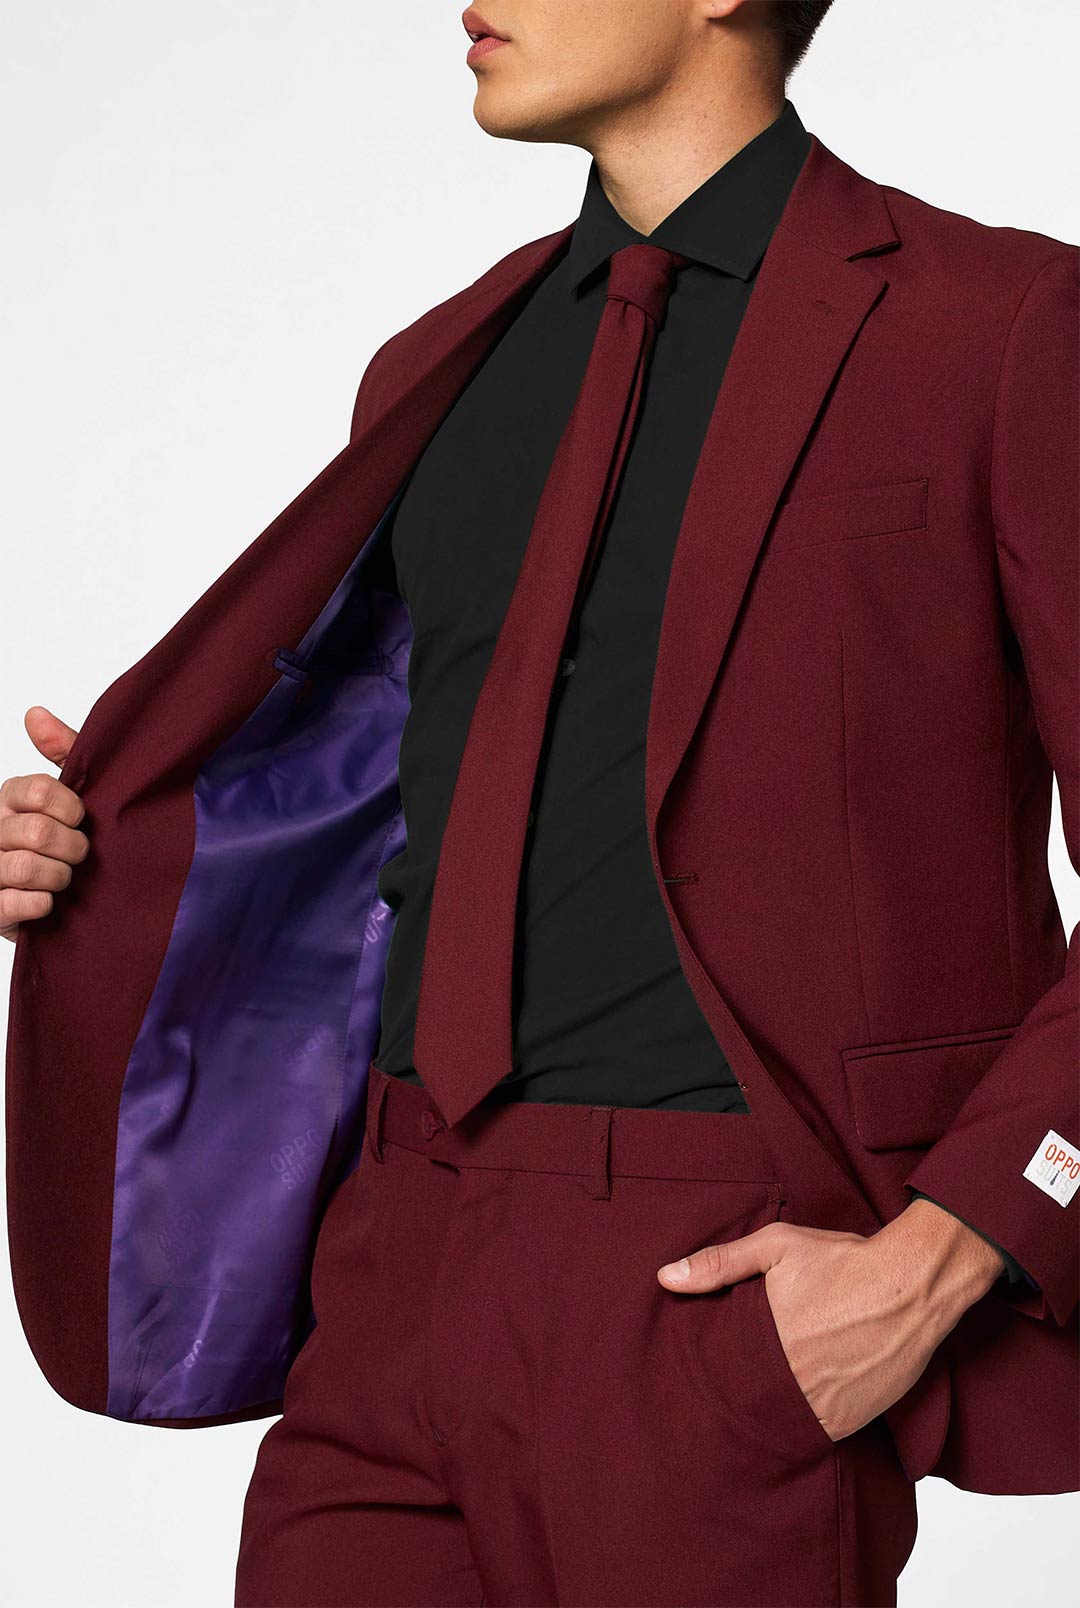 Burgundy Tuxedo | Suits for Weddings & Events